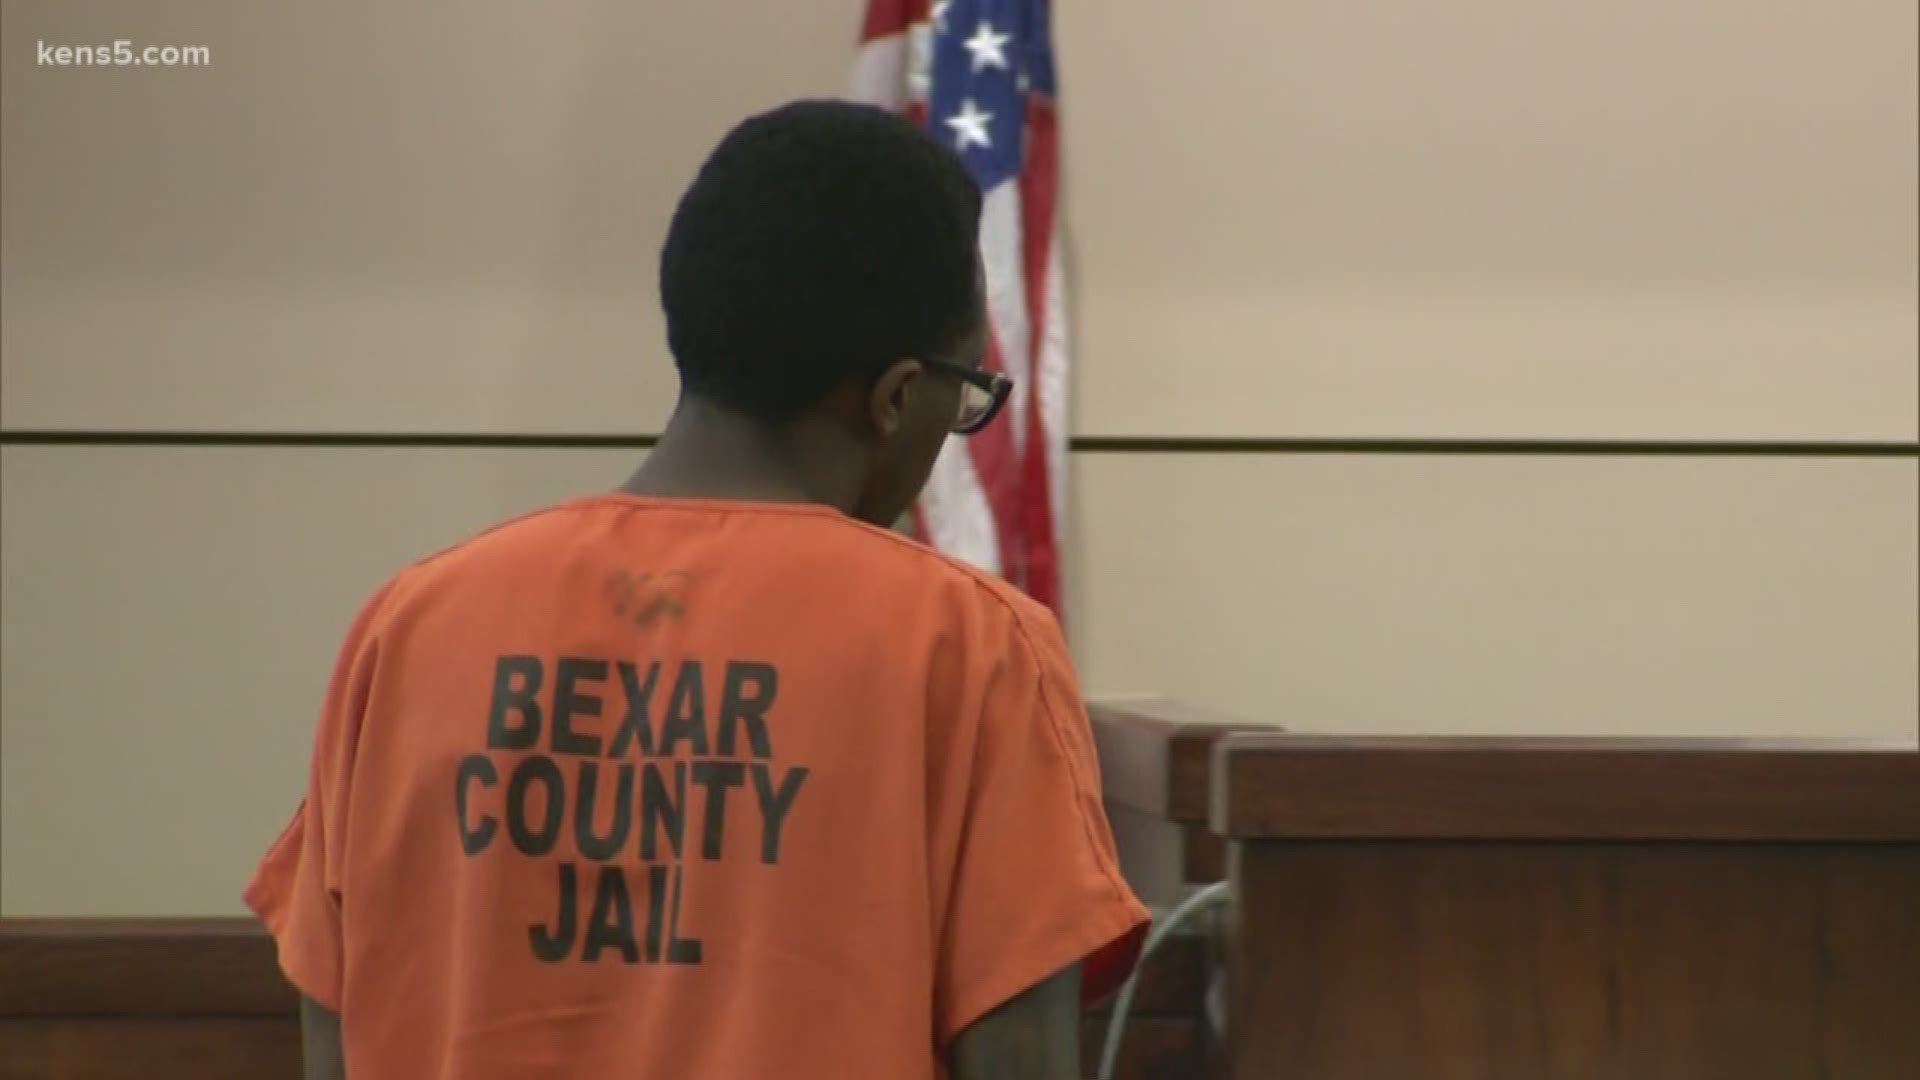 A Bexar County jury says a man police accused of having a gun in a deadly officer-involved shooting is not guilty. The verdict came Thursday after nearly two days of deliberation.